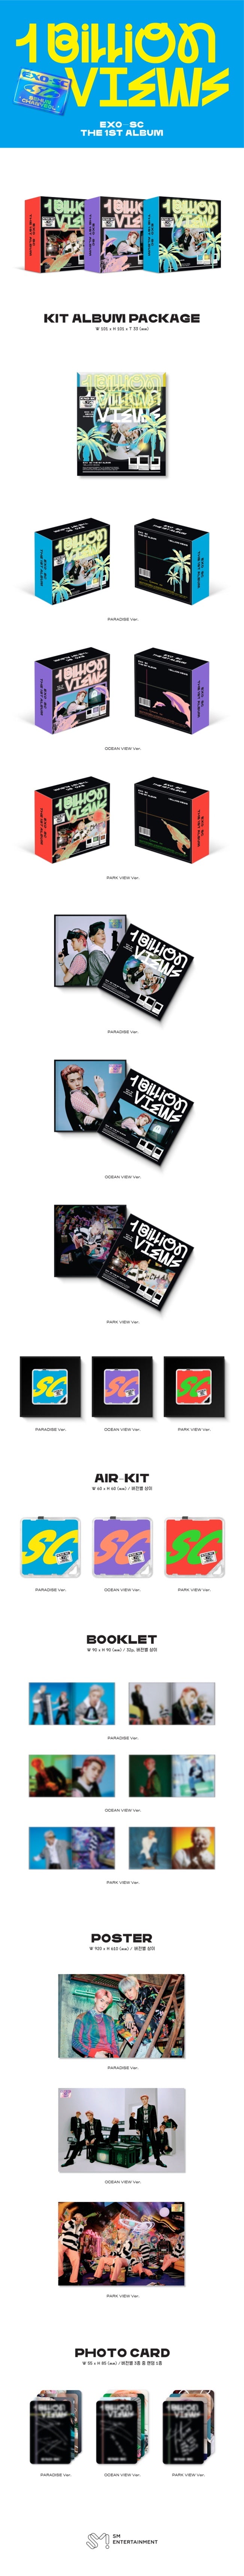 1 Air-kit
1 Booklet (32 pages)
1 Photo Card